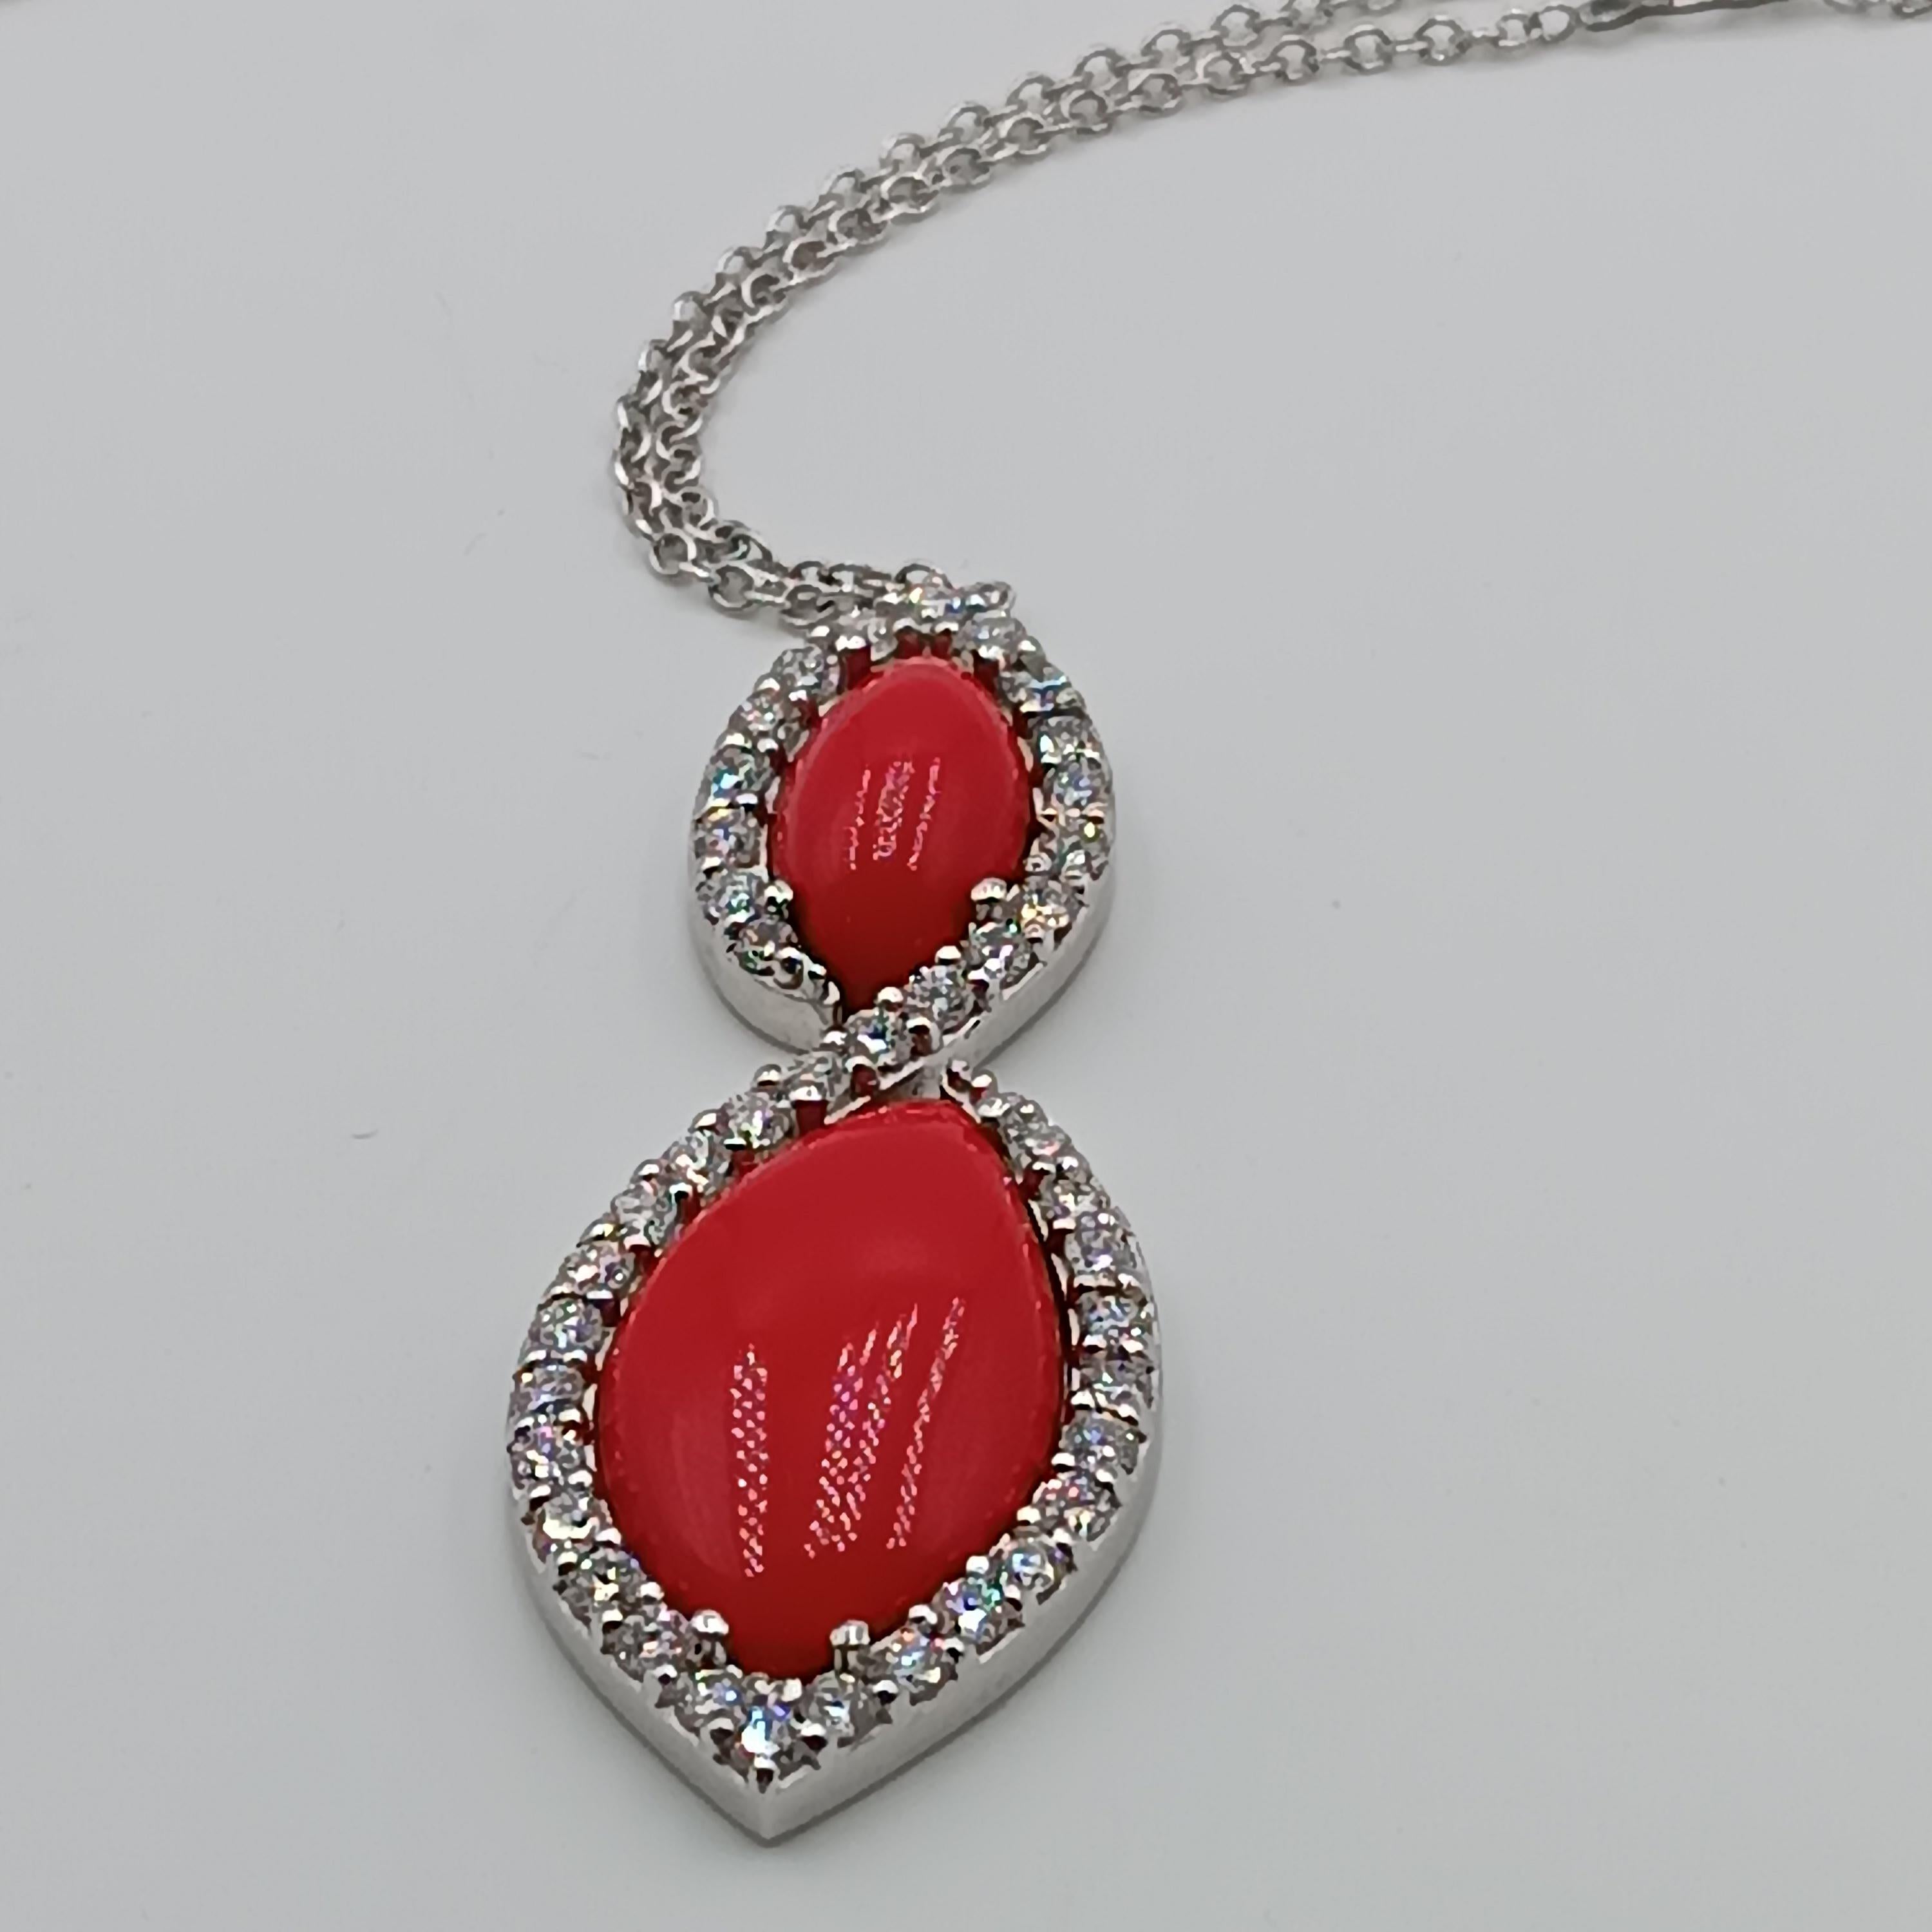 This wonderful Leo Milano pendant from our Pagano collection shows in every detail a very complicate yet perfectly done workmanship. The pendant and the chain are in 18 carat white gold with coral paste . The object weights 12,11 grams the total